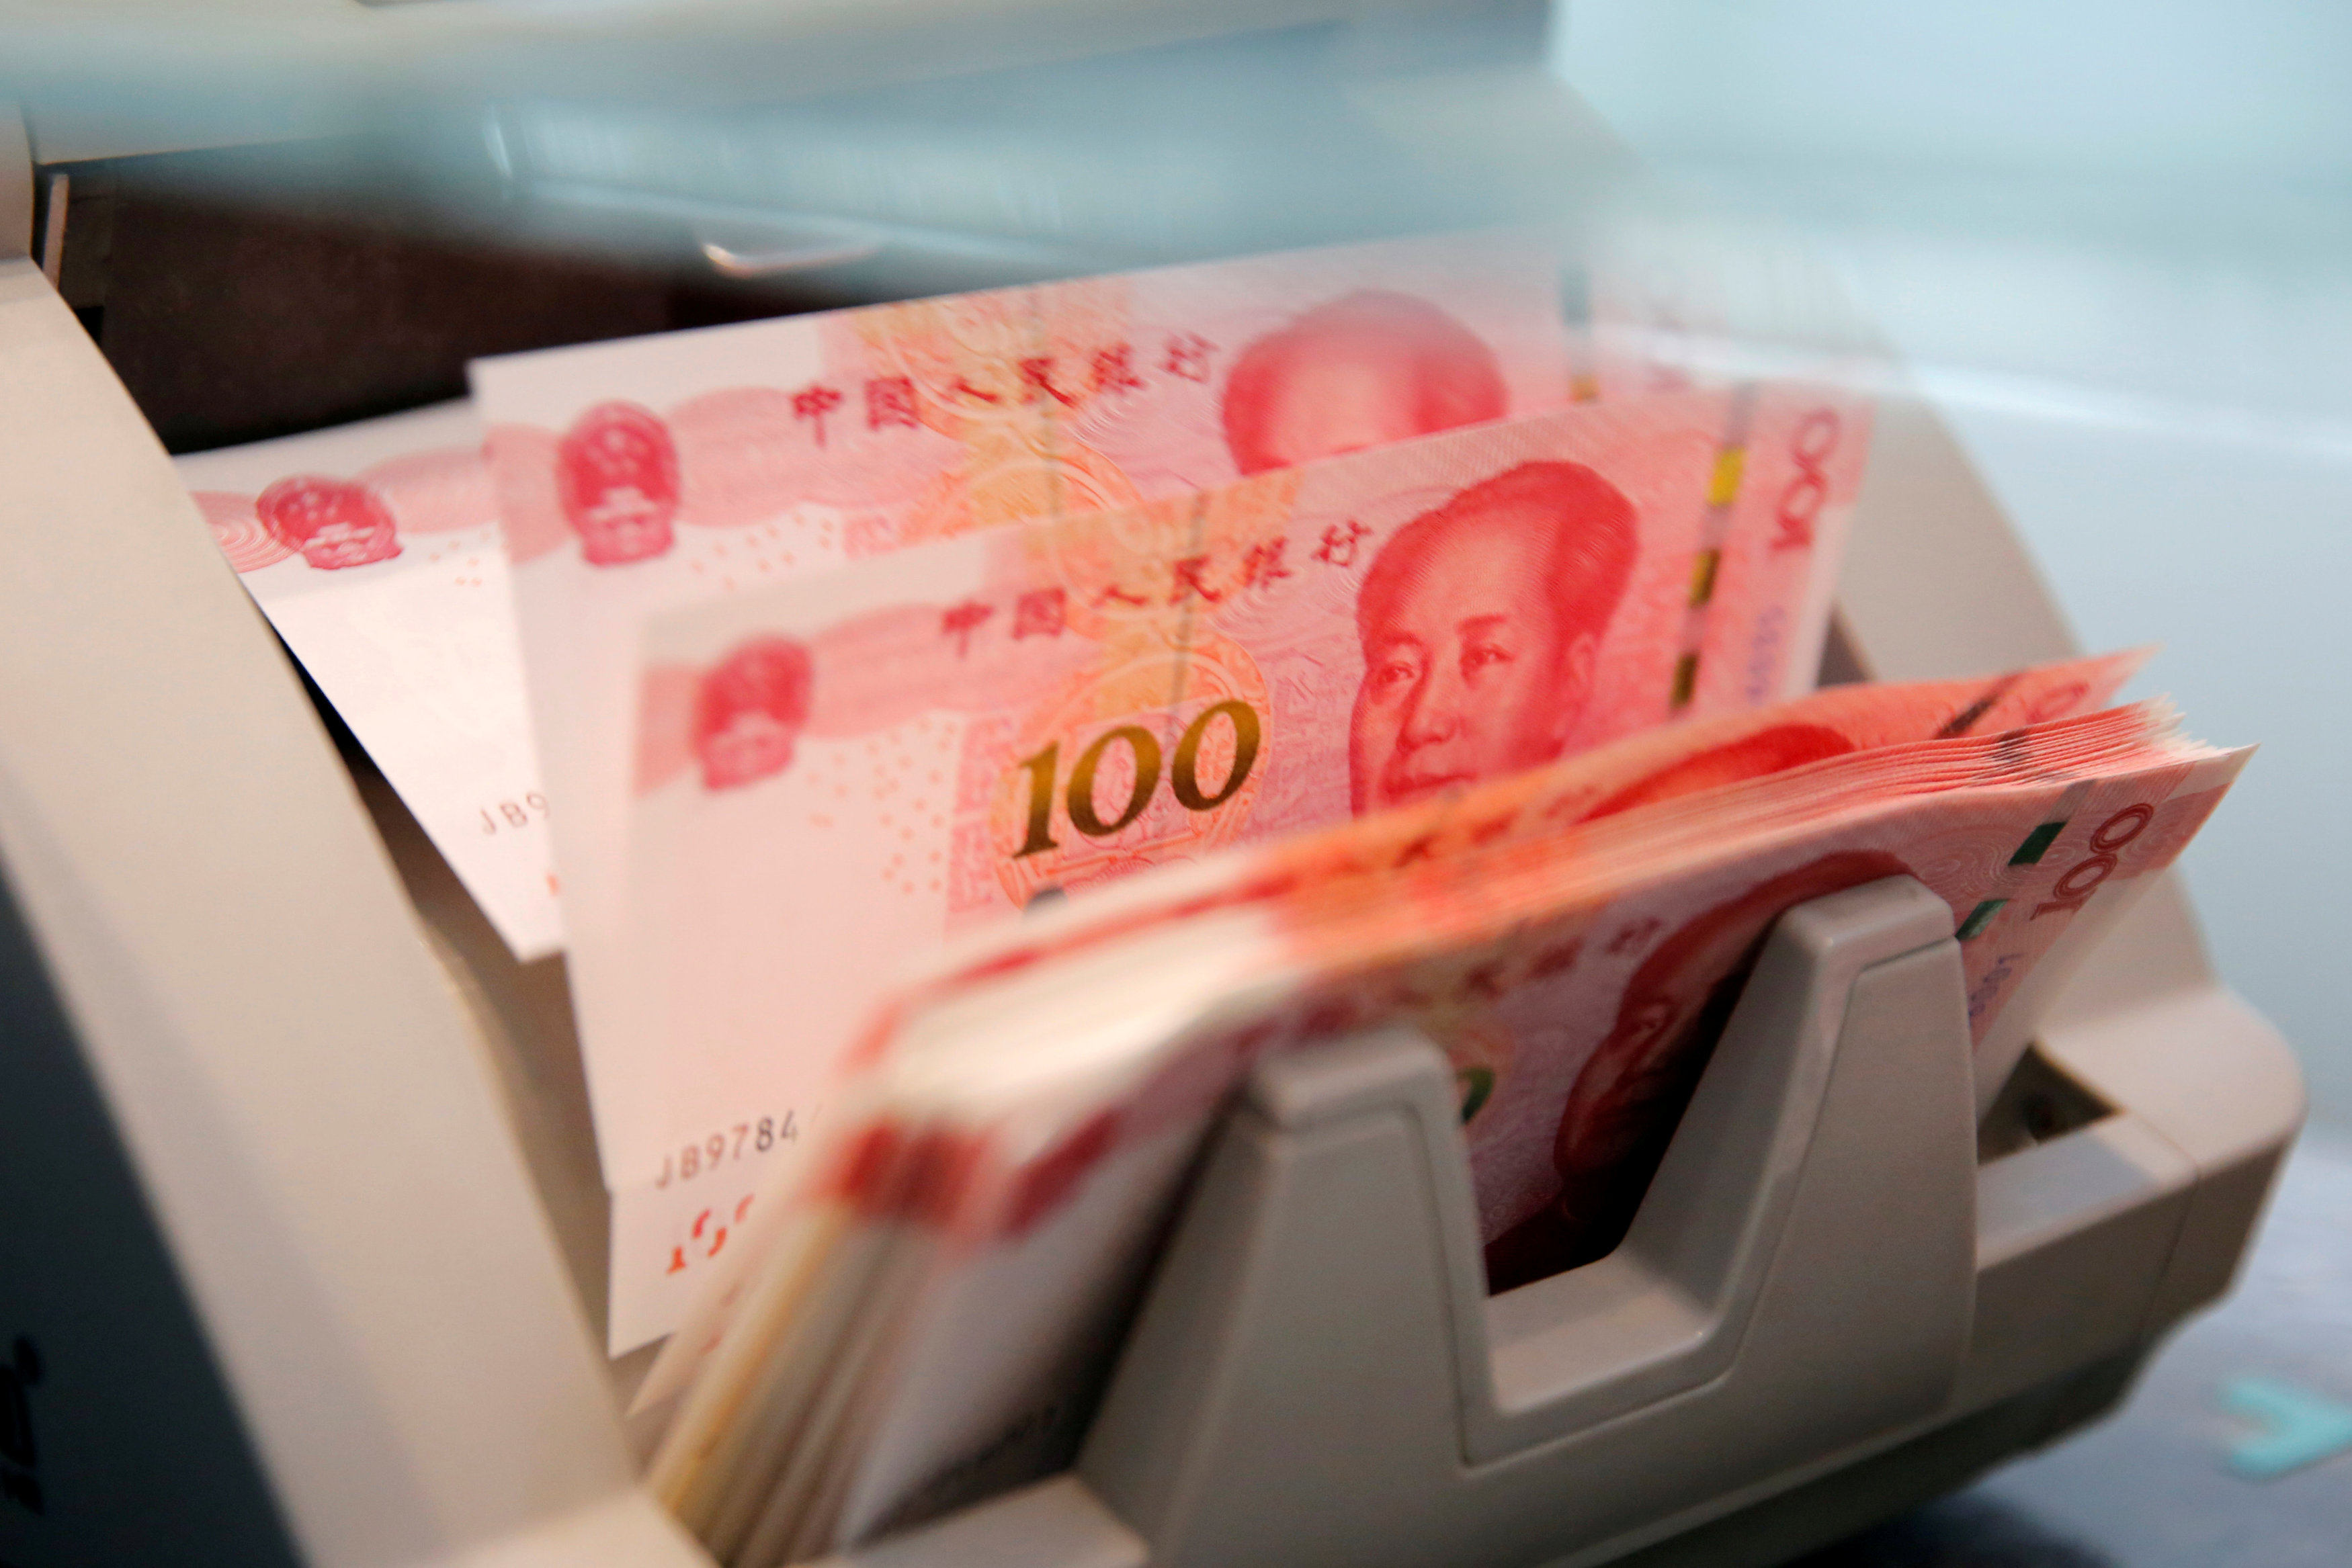 China to step up banking oversight in 'arduous' fight on financial risks